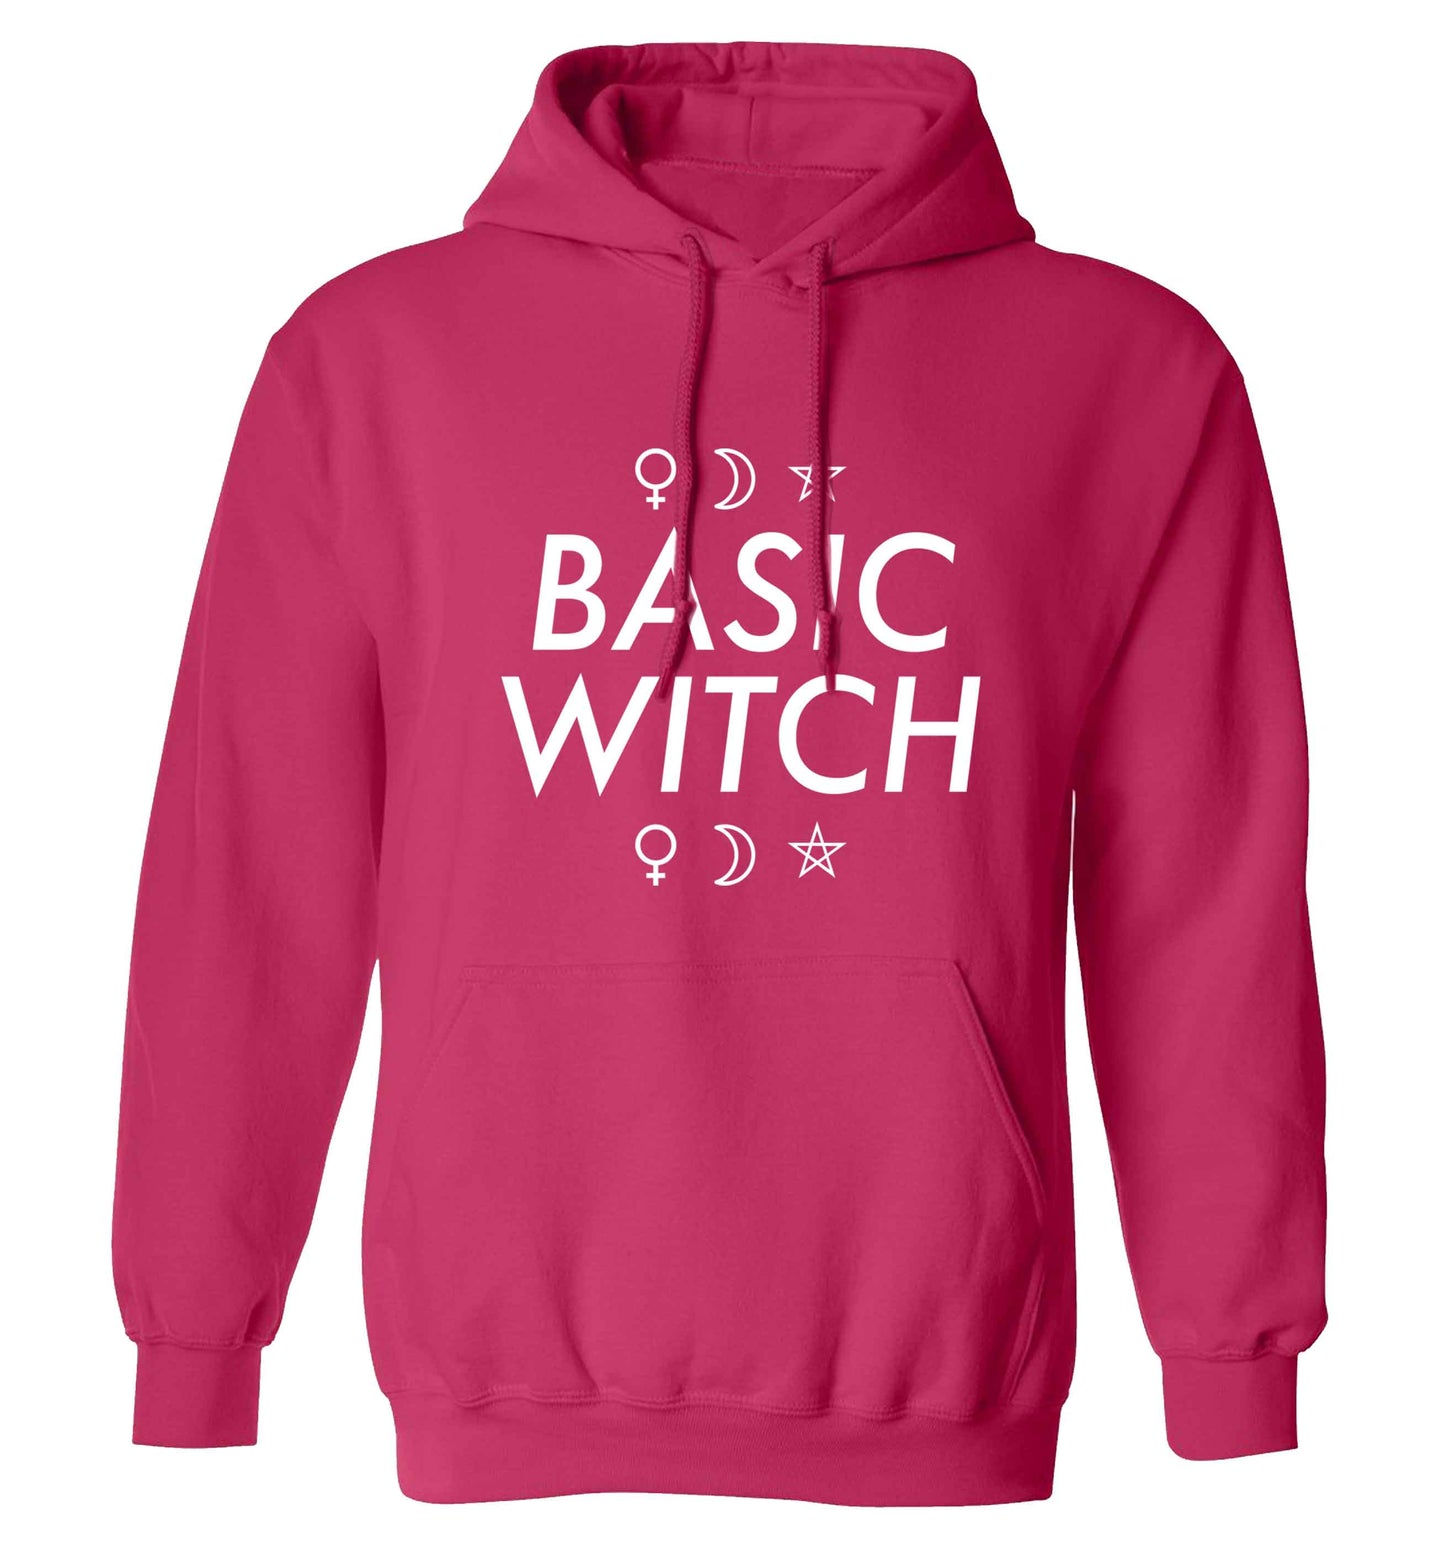 Basic witch 1 adults unisex pink hoodie 2XL